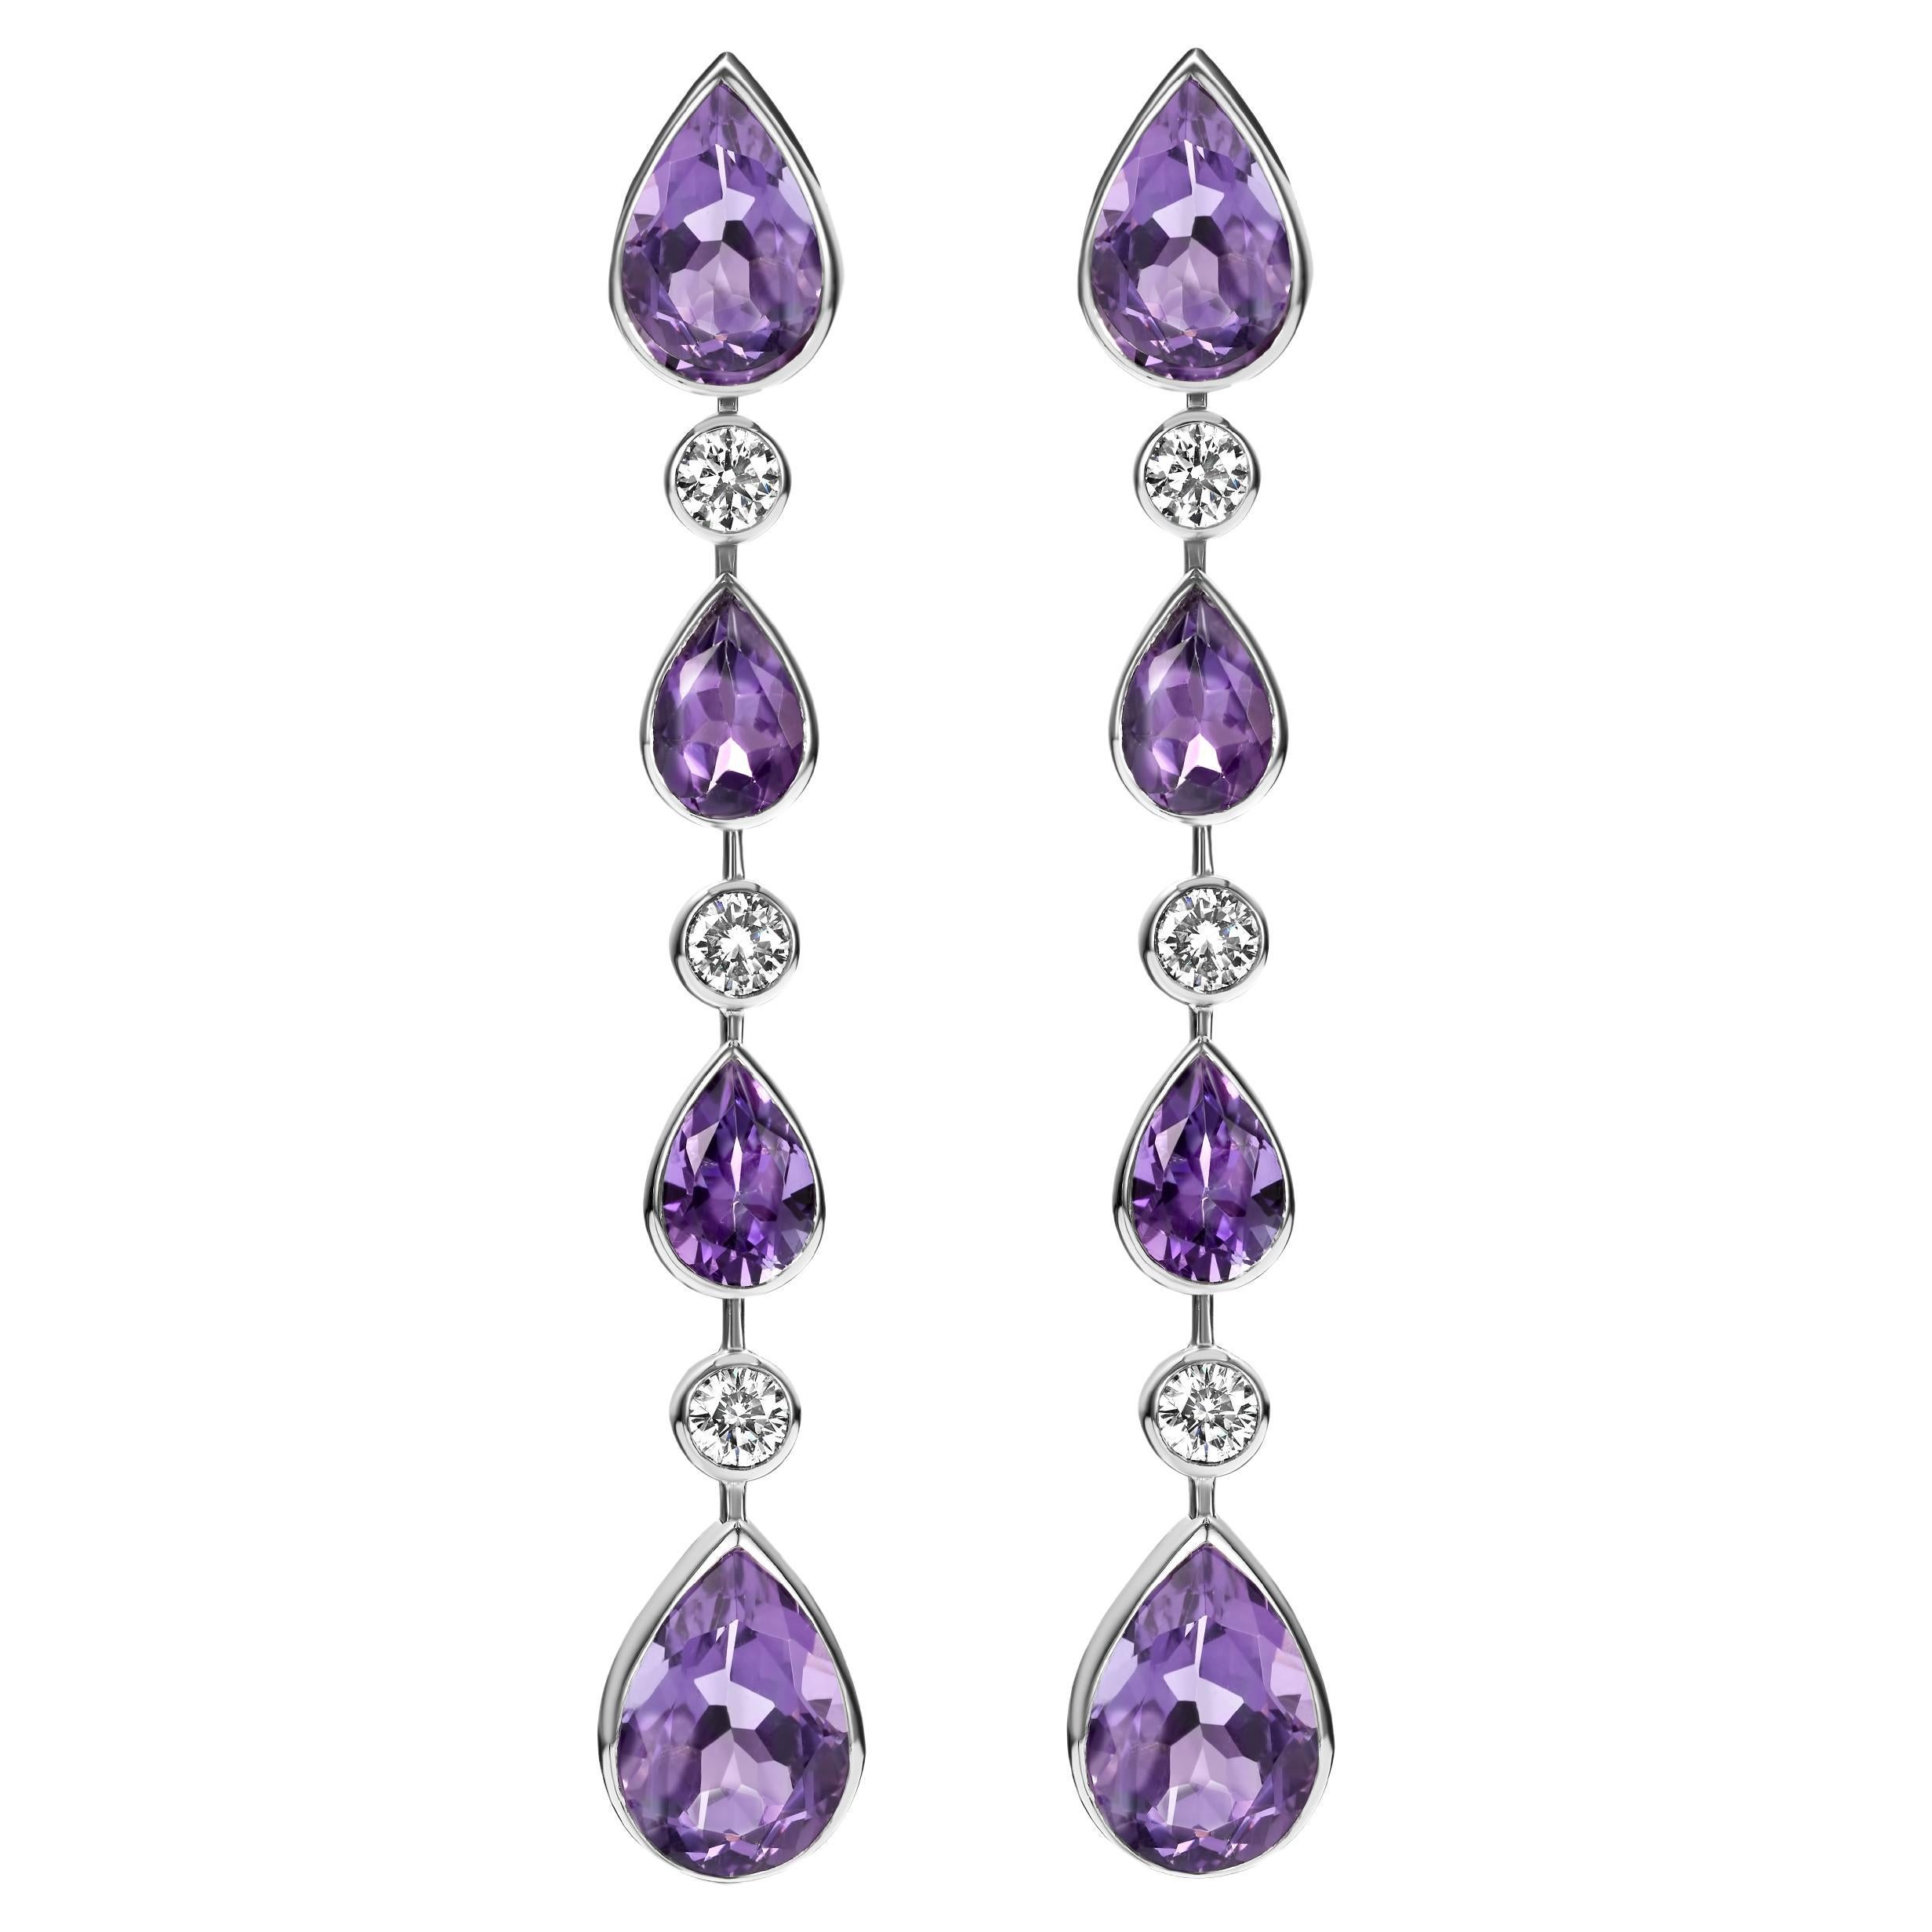 18 Kt White Gold Earrings with 18.43ct Amethyst & 1.55ct Brilliant Cut Diamonds For Sale